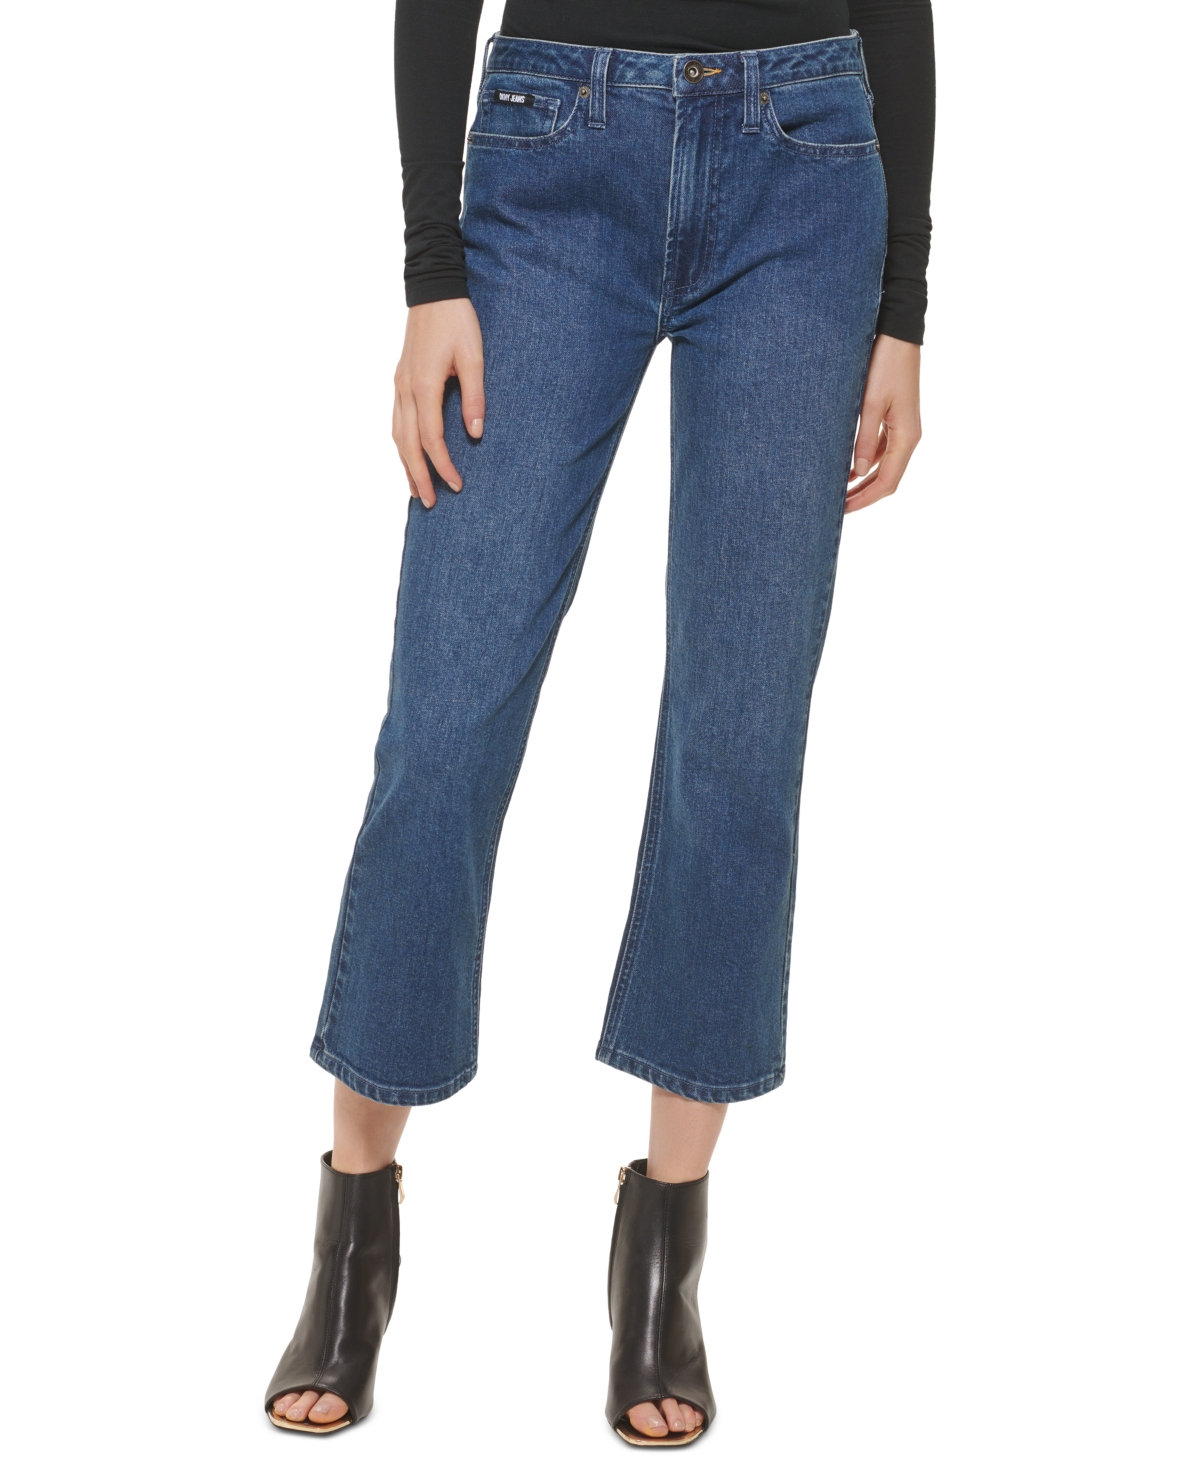  Dkny Jeans Women's High-Rise Cropped Kick-Flare Jeans